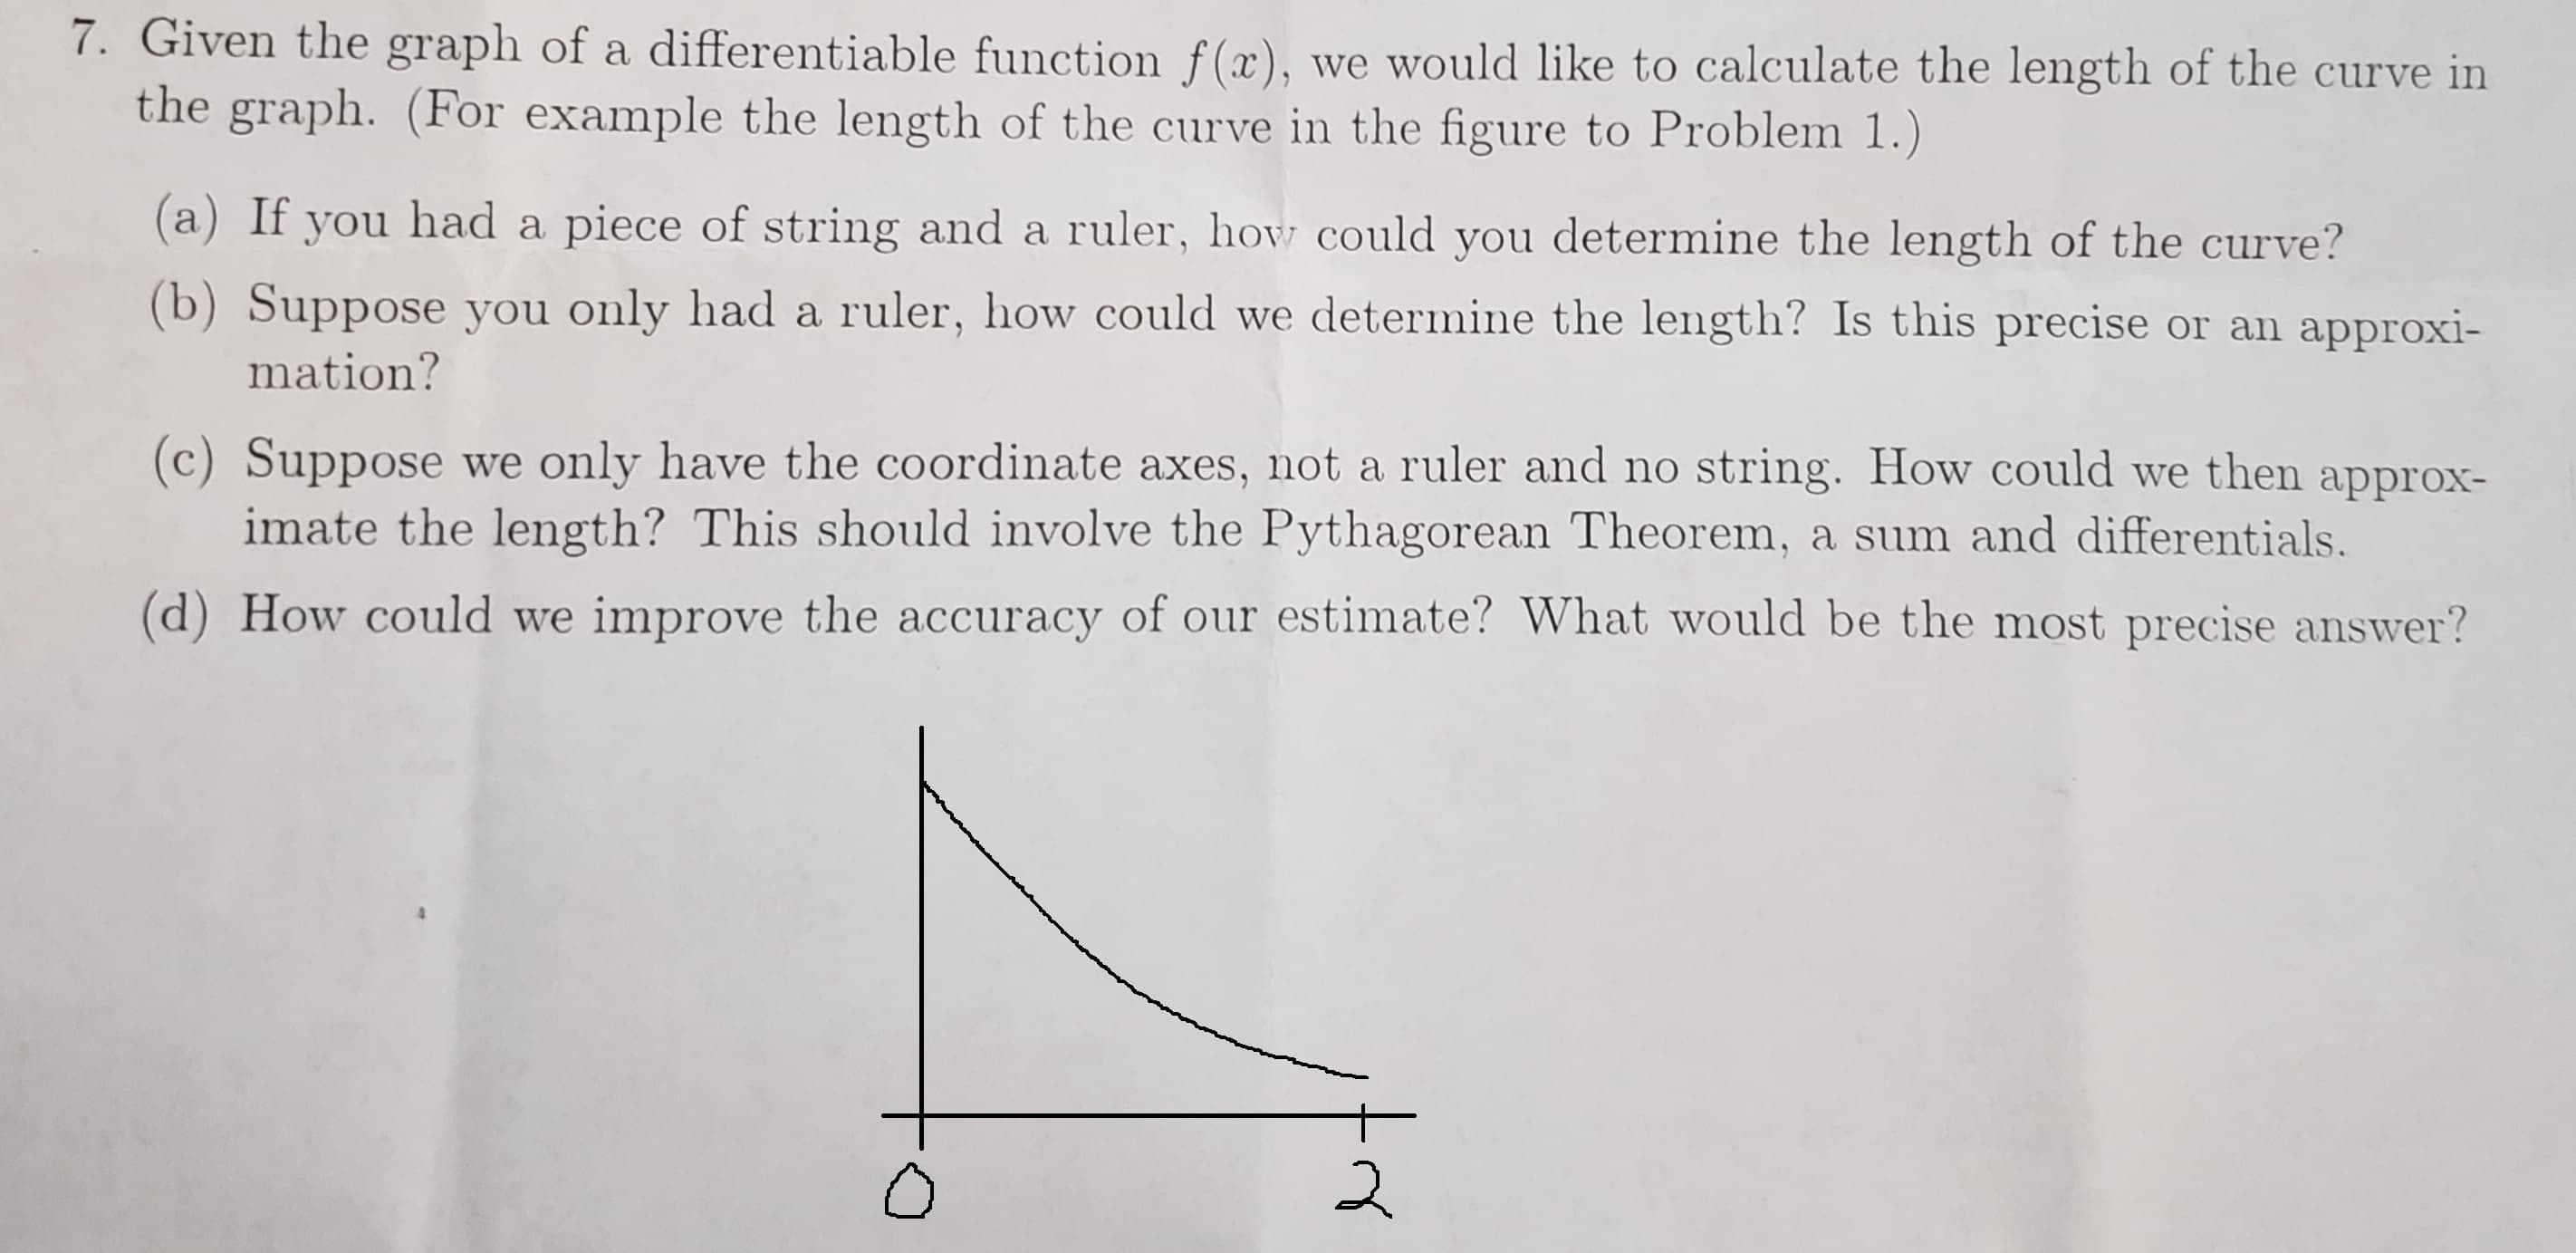 7. Given the graph of a differentiable function f(x), we would like to calculate the length of the curve in
the graph. (For example the length of the curve in the figure to Problem 1.)
(a) If you had a piece of string and a ruler, how could you determine the length of the curve?
(b) Suppose you only had a ruler, how could we determine the length? Is this precise or an approxi-
mation?
(c) Suppose we only have the coordinate axes, not a ruler and no string. How could we then approx-
imate the length? This should involve the Pythagorean Theorem, a sum and differentials.
(d) How could we improve the accuracy of our estimate? What would be the most precise answer?
